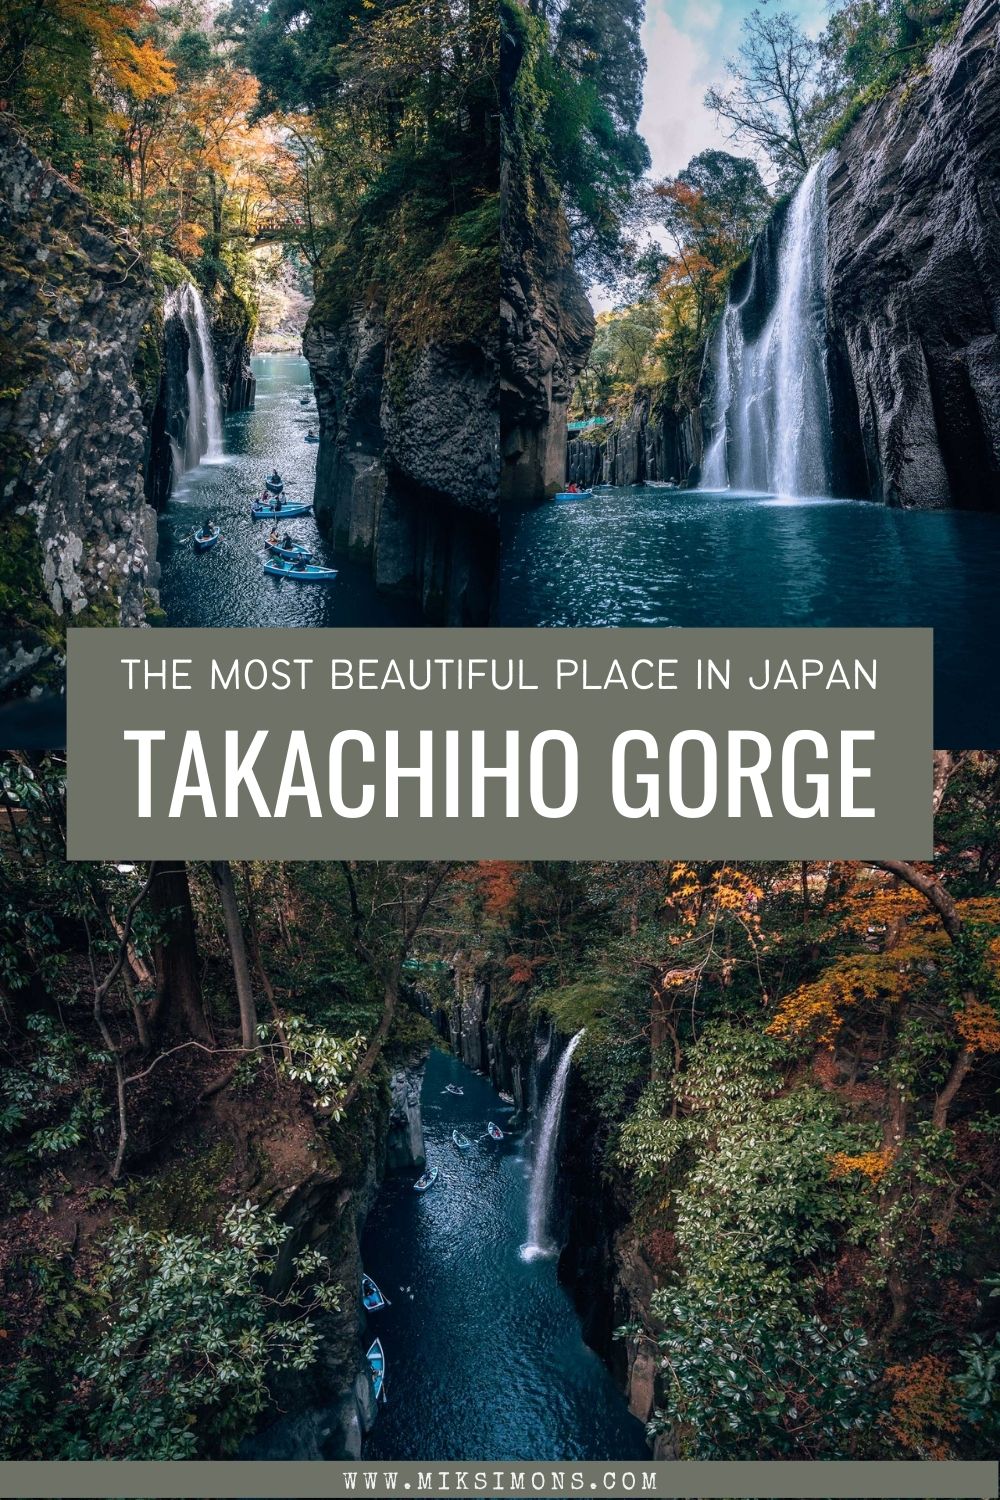 Takachiho Gorge - the most beautiful place in Japan